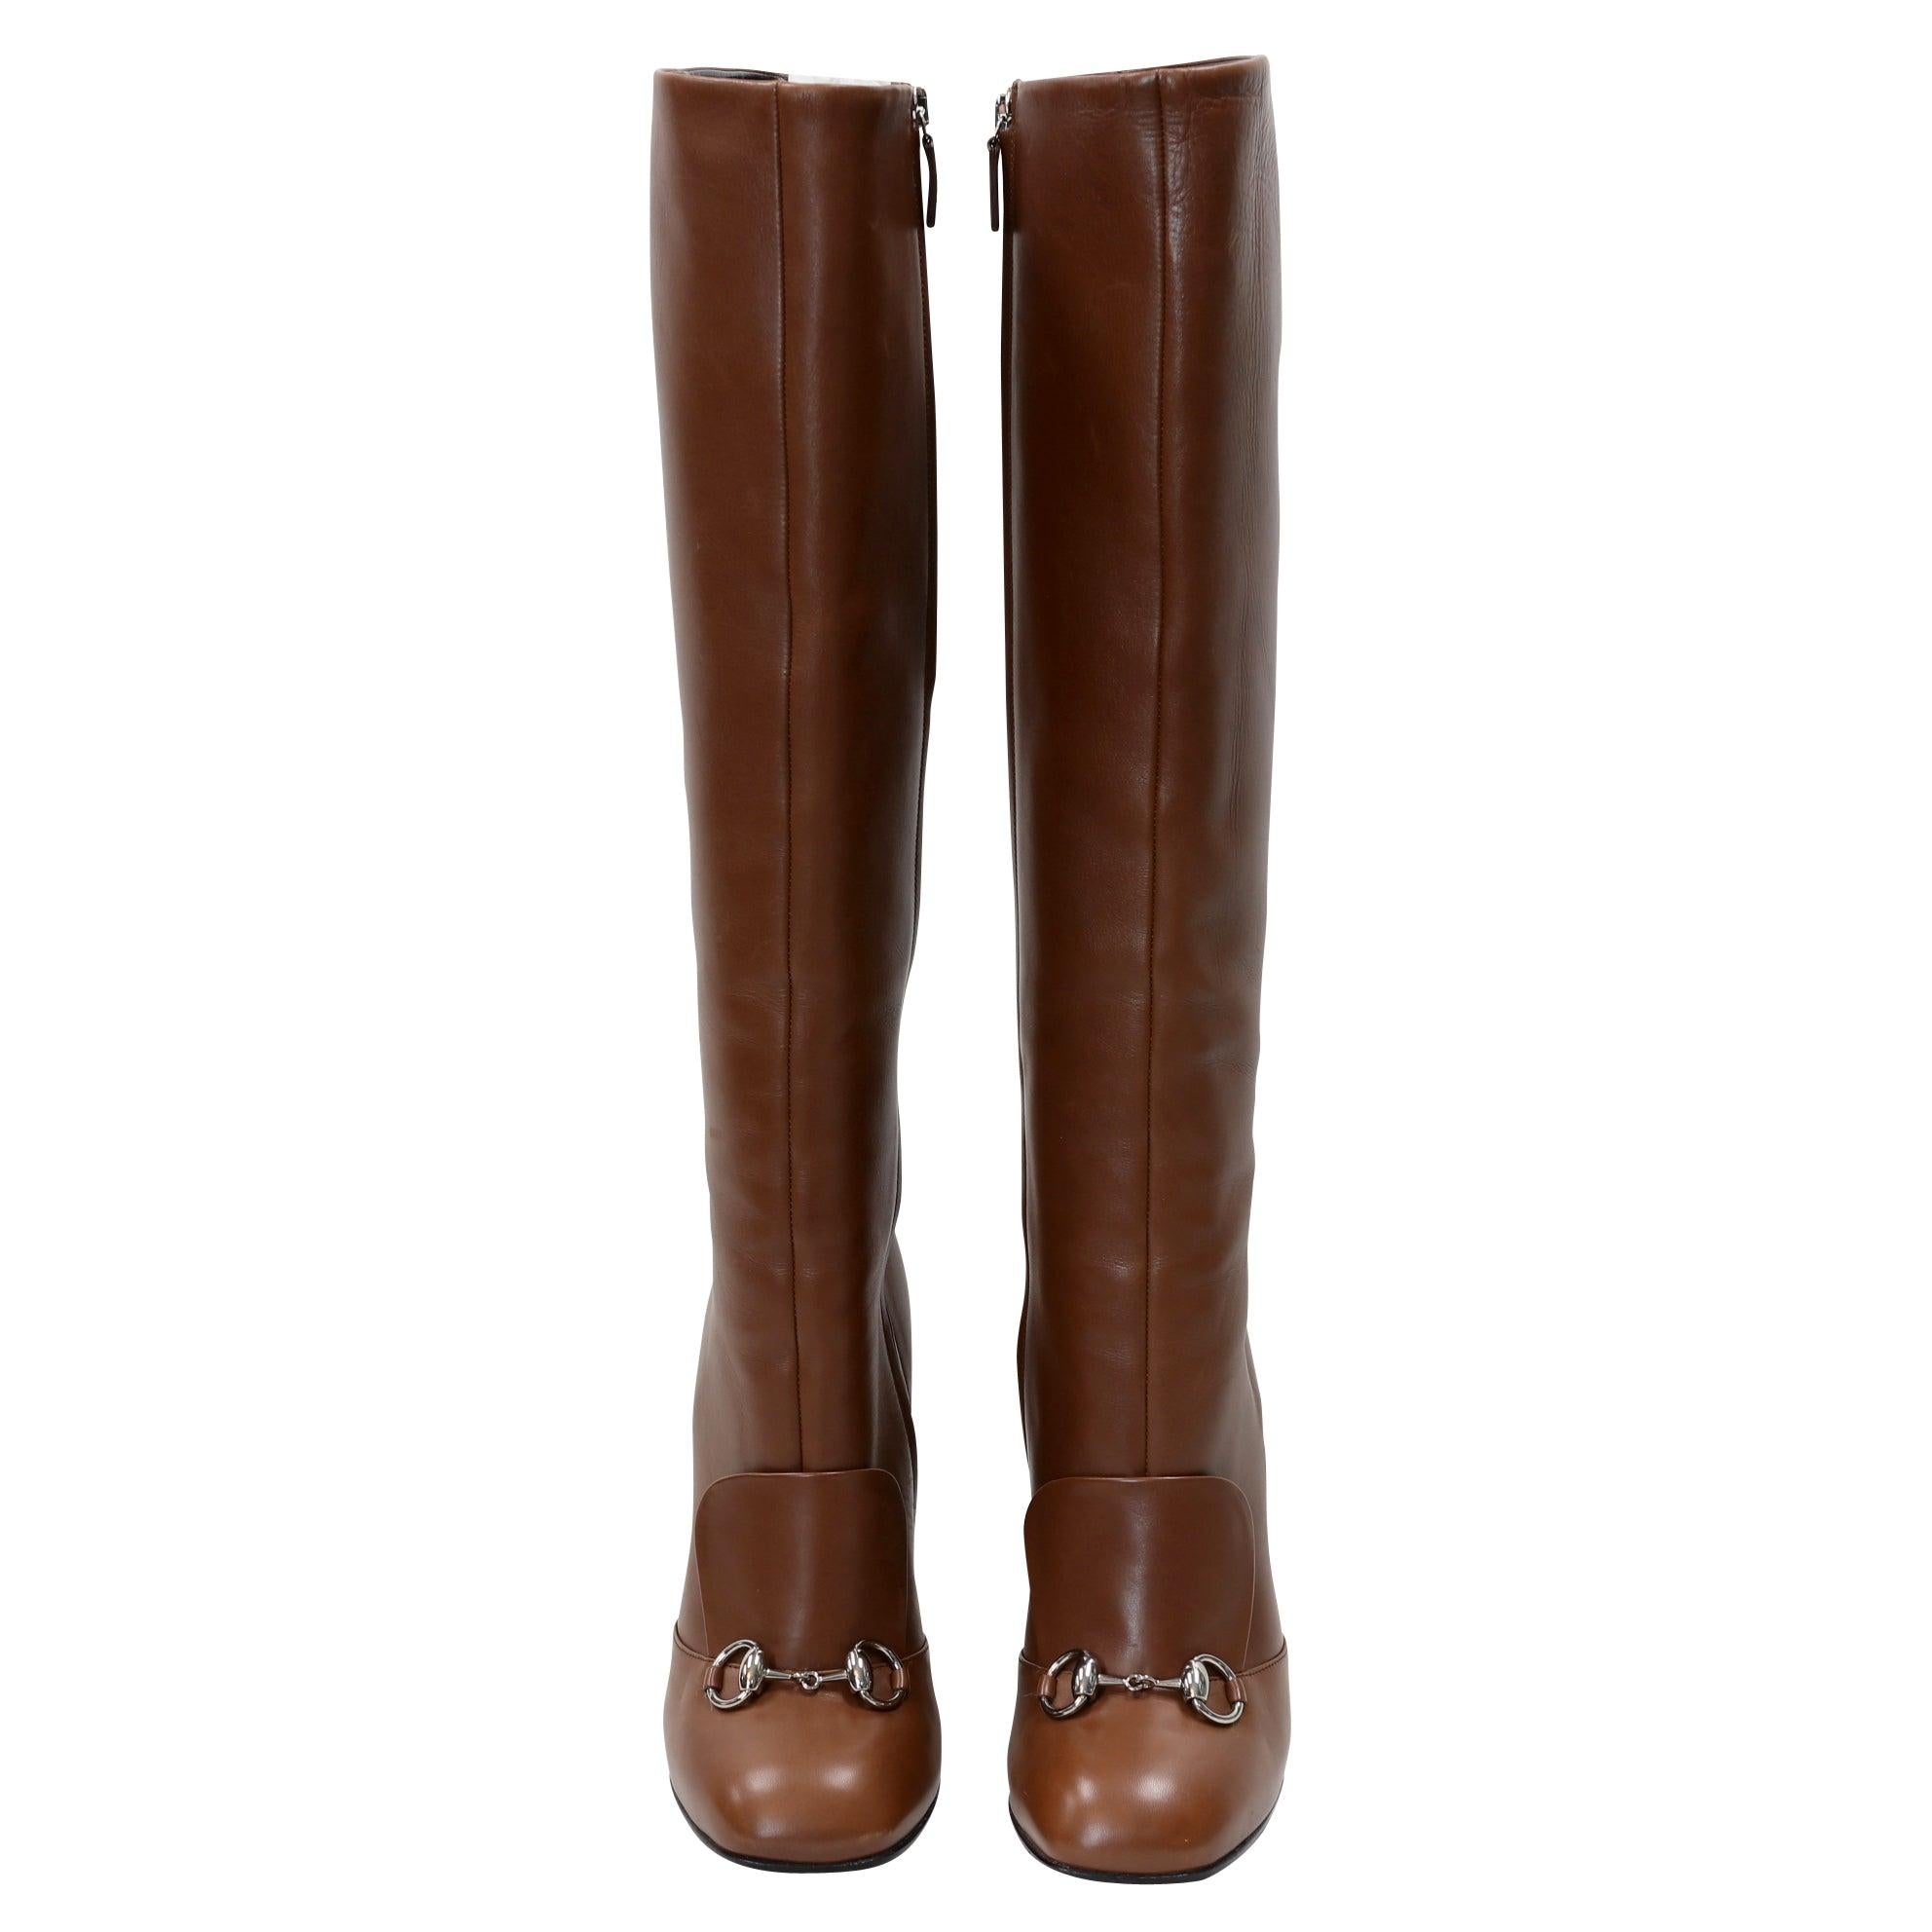 These Gucci boots have a vintage-inspired look. Made from honey brown smooth leather, these boots feature a silver tone horsebit at the vamp with a modern flap detail and a block heel. Leather lined uppers make for a comfortable fit. These boots are